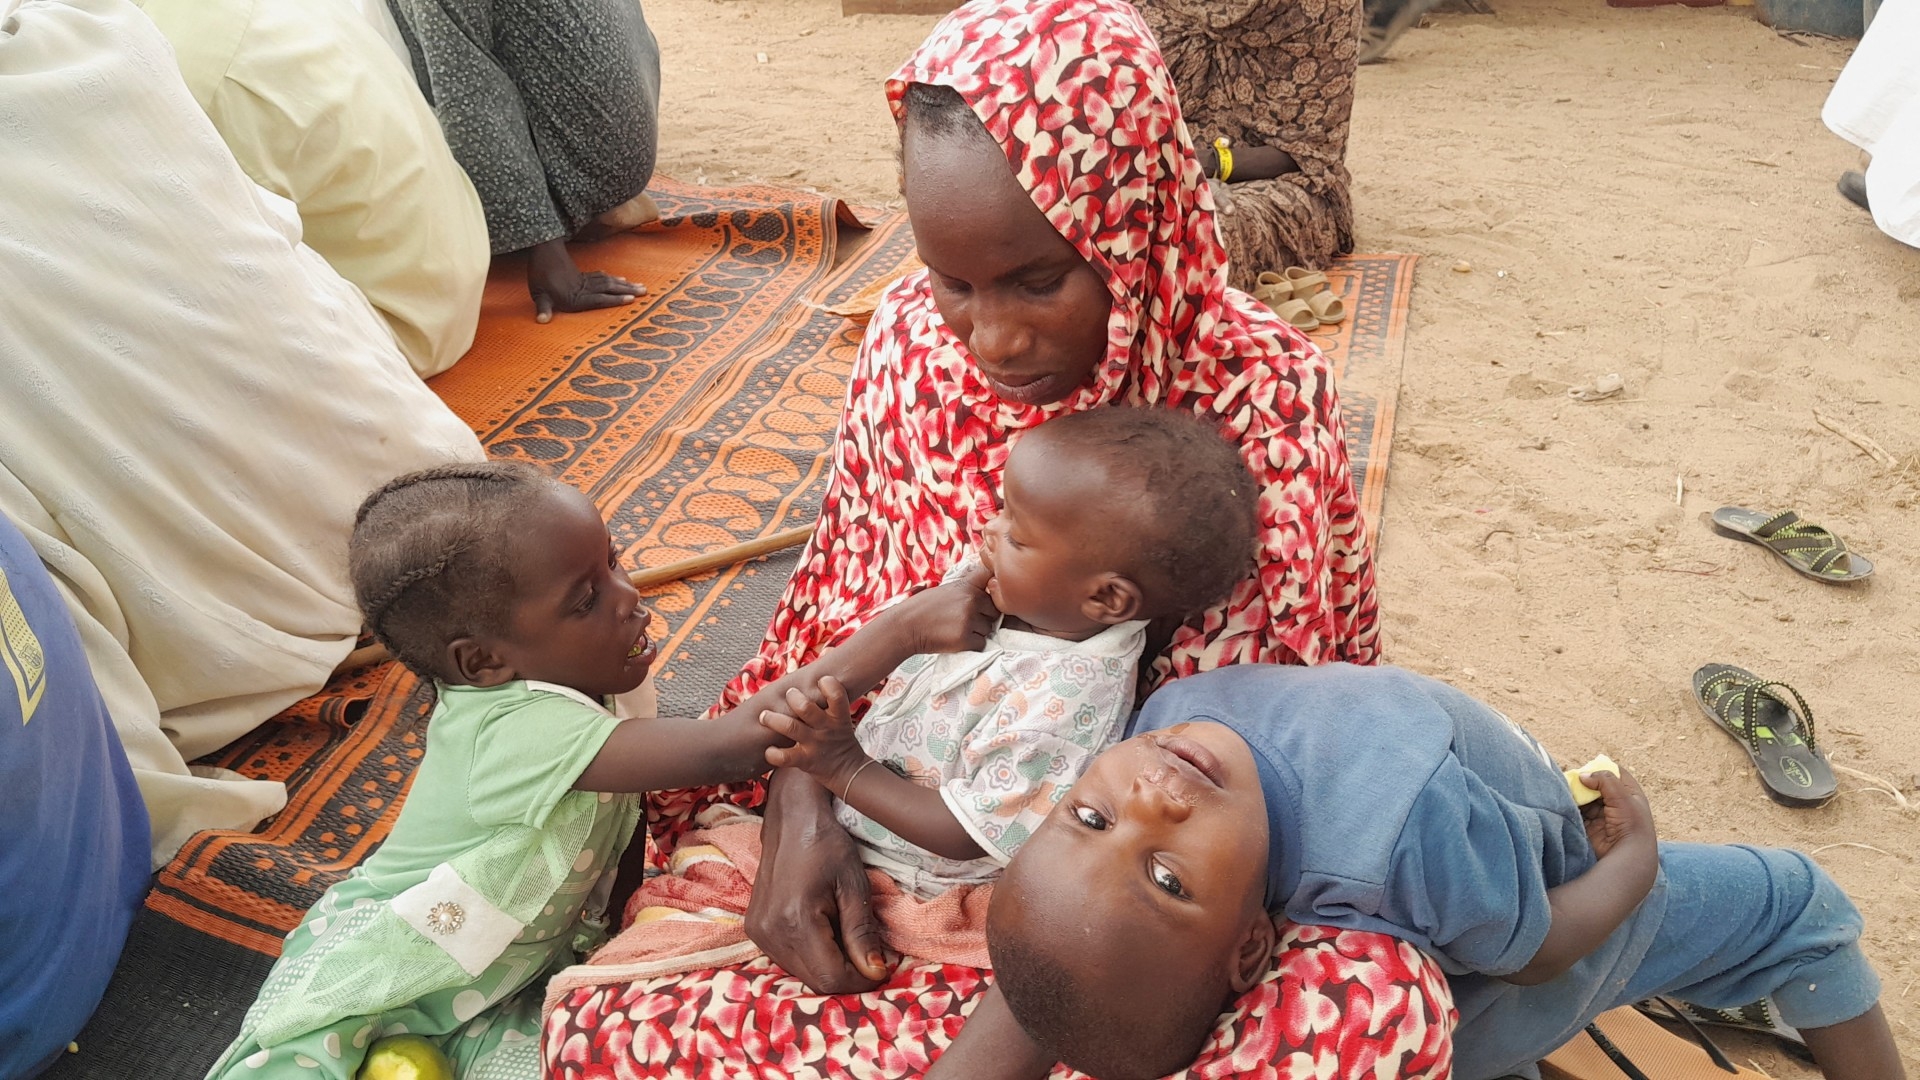 A Sudanese refugee who fled the violence is seen with her children as she gathers with other refugees near the border between Sudan and Chad, in Koufroun, Chad on 29 April (Reuters)